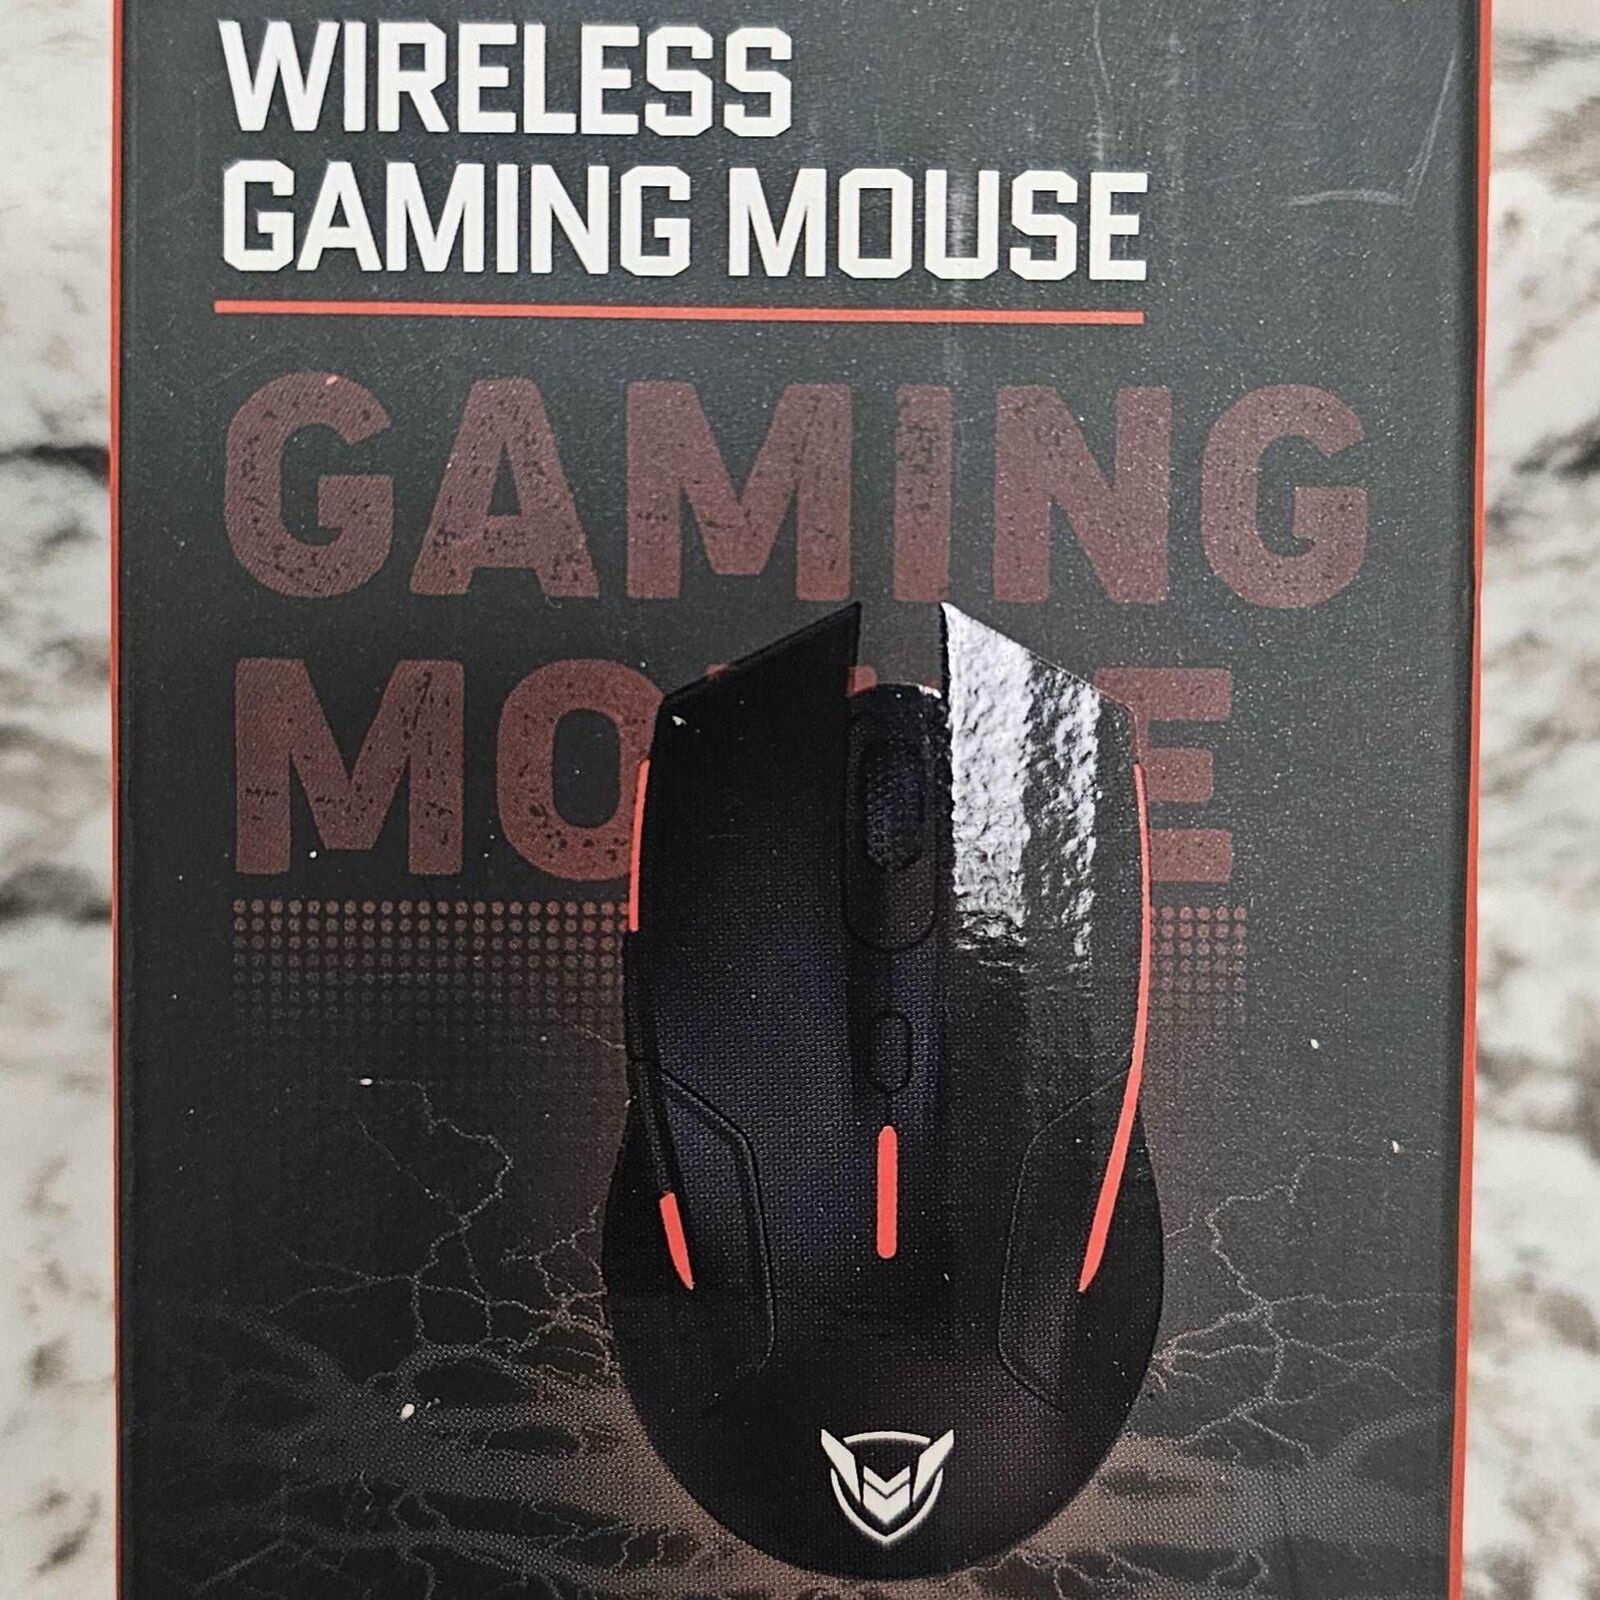 Wireless Gaming Mouse Pictek PC280A